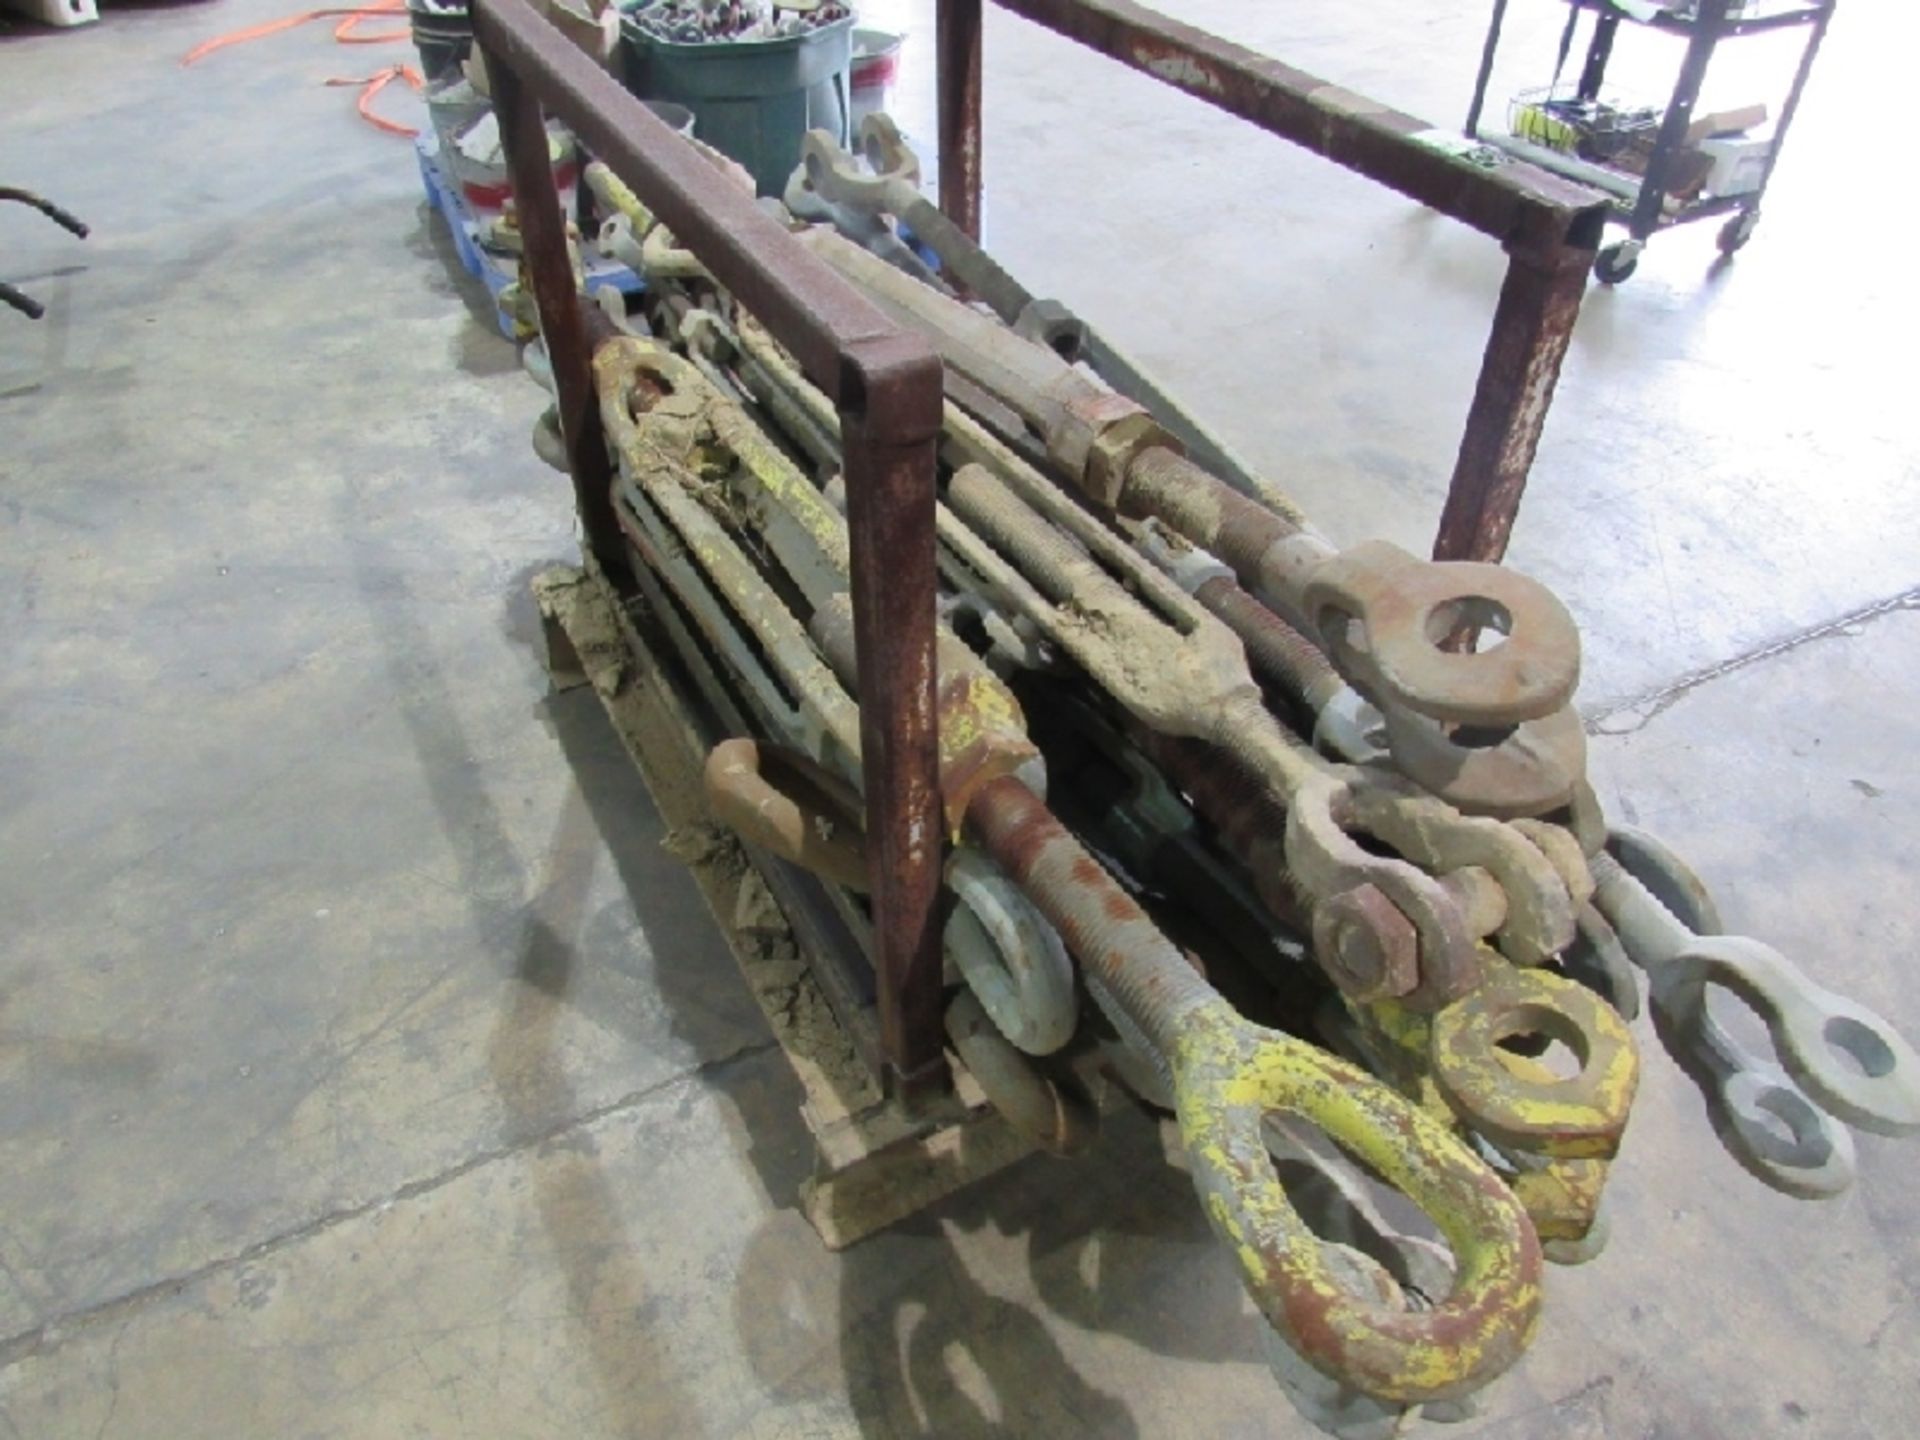 (approx qty - 20) Turnbuckles and Rack- ***Located in Chattanooga, TN*** MFR - Unknown Sizes Range - Bild 3 aus 8